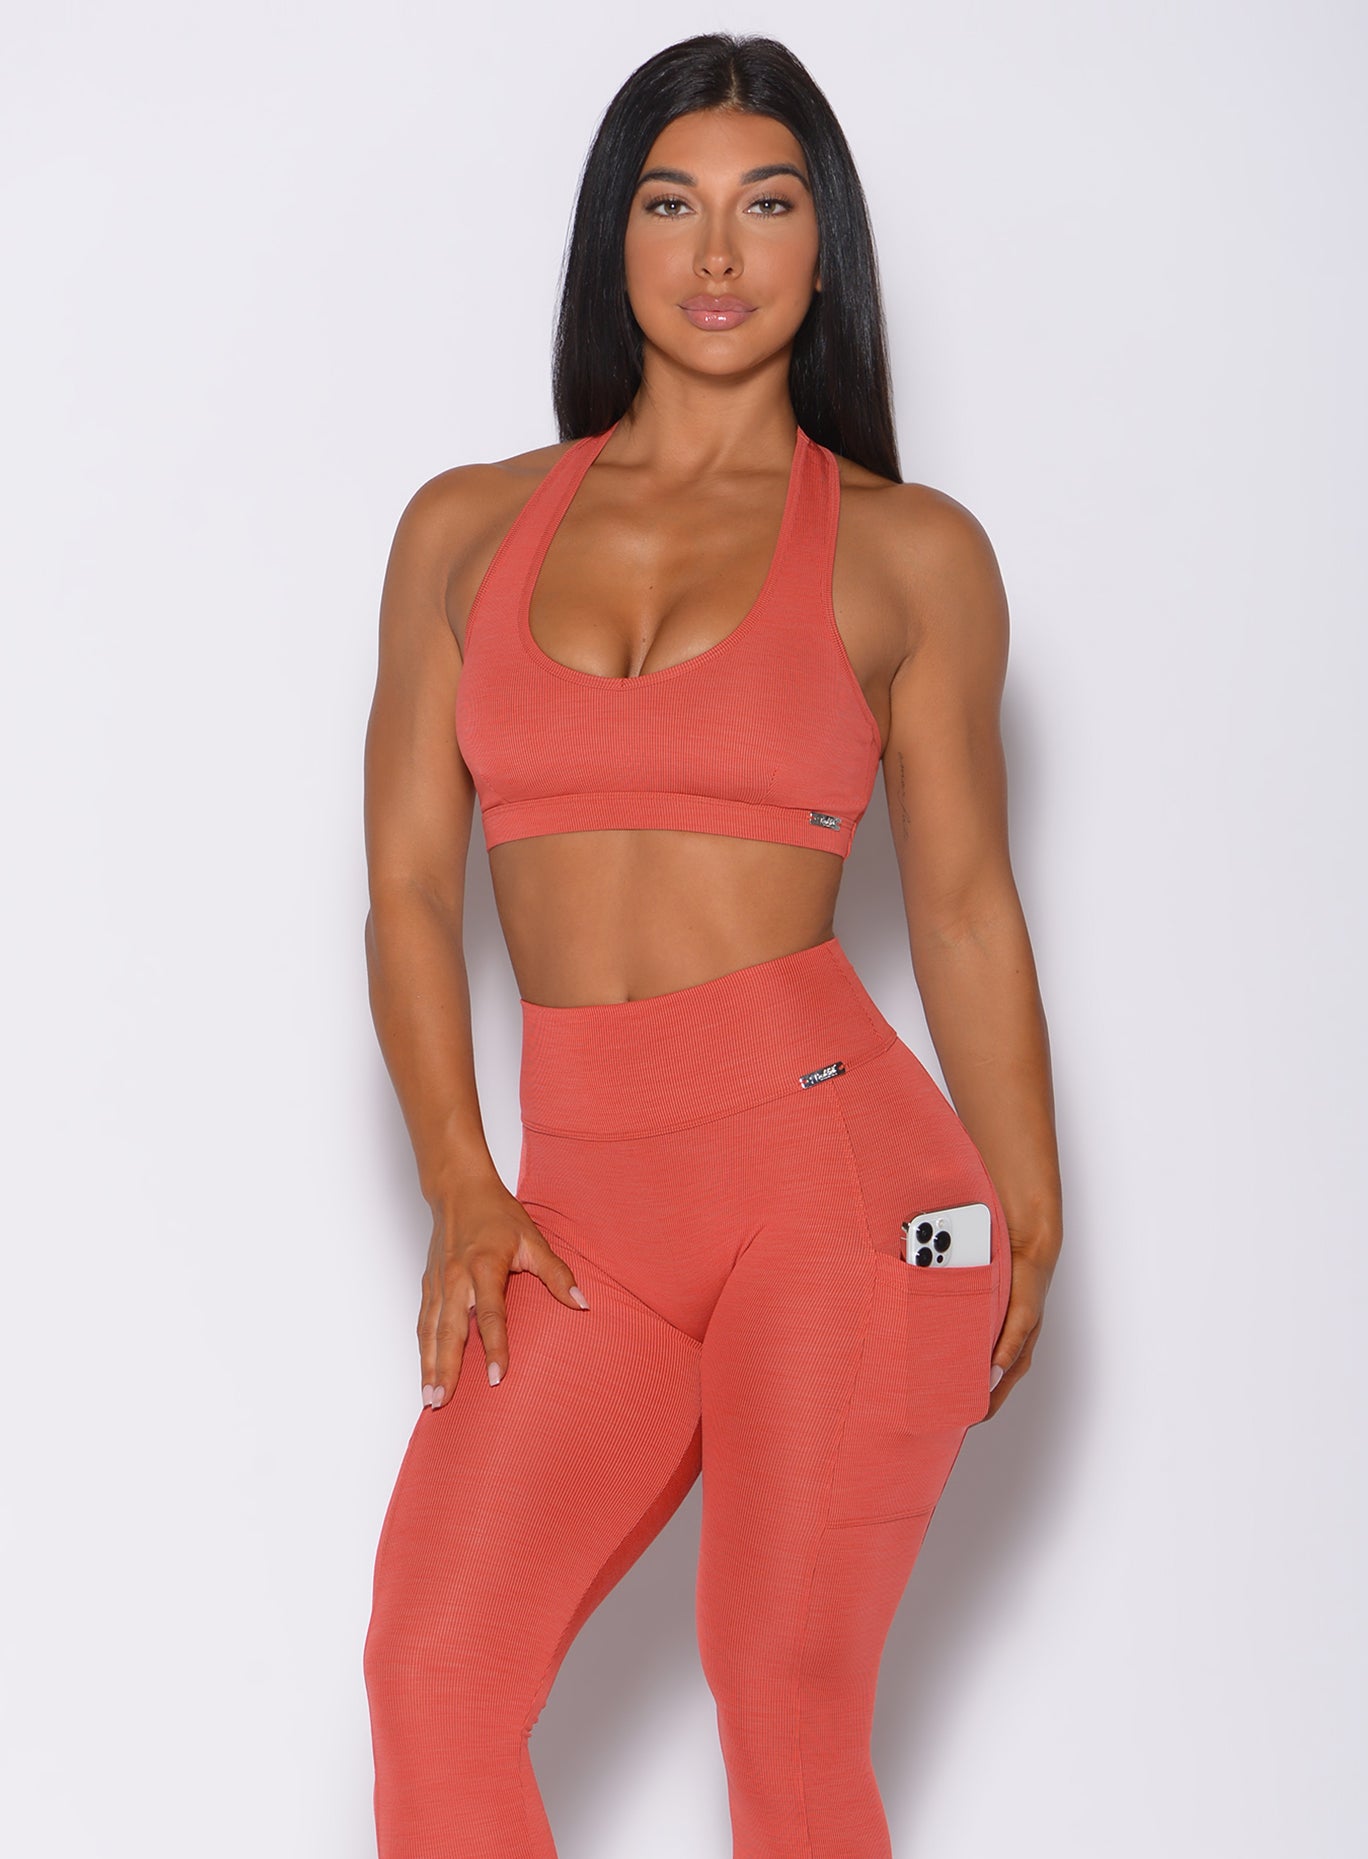 Model facing forward wearing our power rib sports bra in burnt orange color and a matching leggings